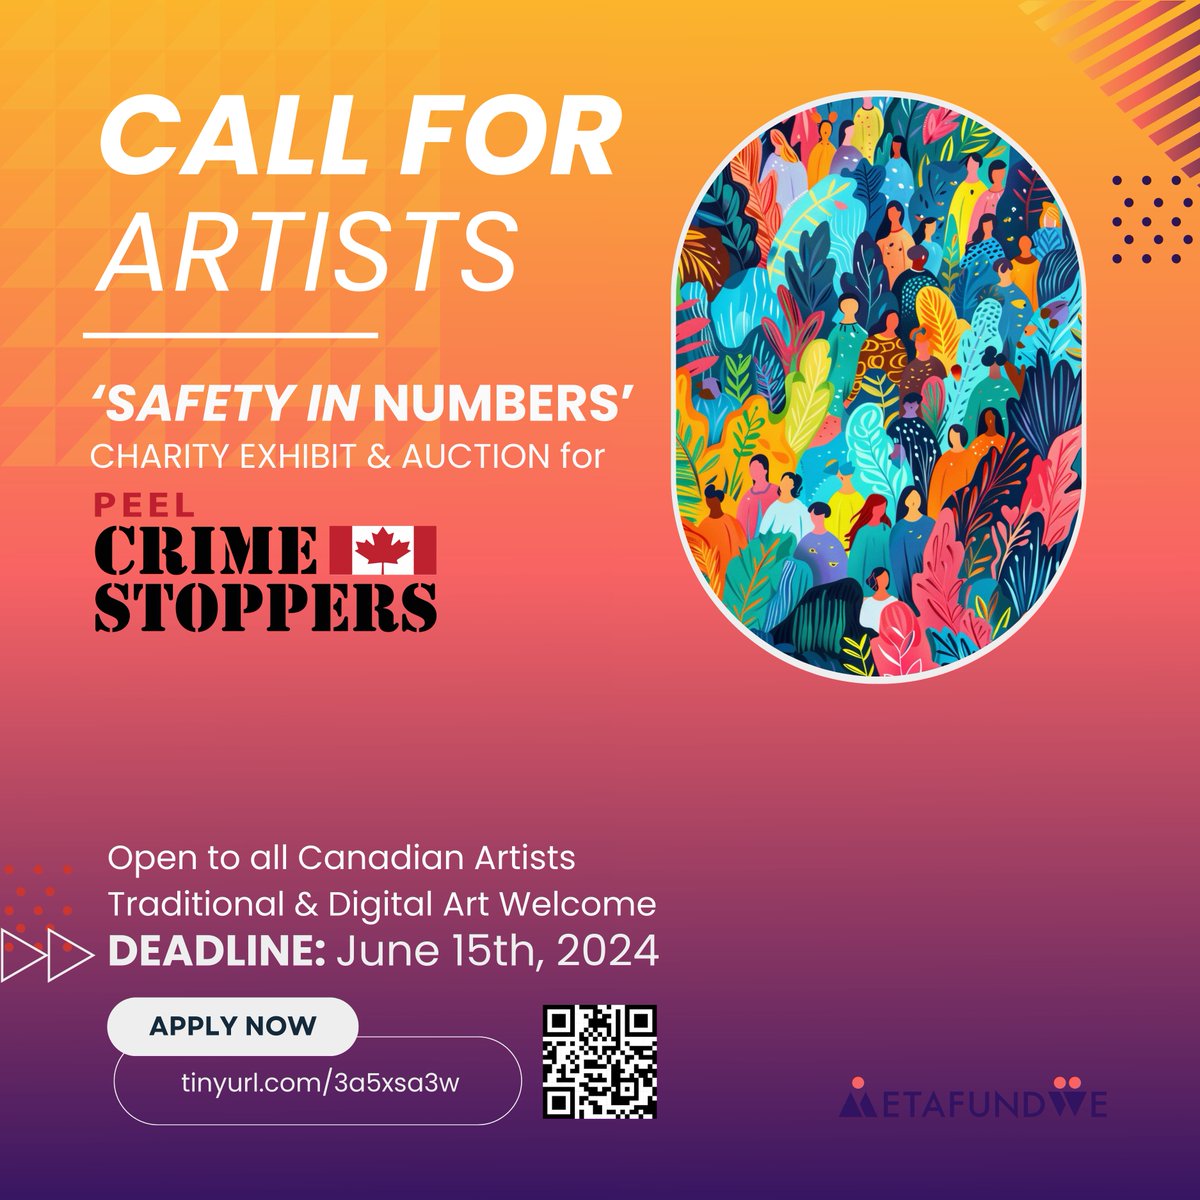 🎨 CALL FOR ARTISTS! Showcase and Sell your Artwork for Impact! ✨ Exhibition Theme: Safety, Community, Care, Connection, Protection 🖌️ Open to Canadian Artists, Traditional & Digital Visual Mediums 📅 Deadline: June 15th, 2024 🔗 Submission form: tinyurl.com/3a5xsa3w 🧵1/5